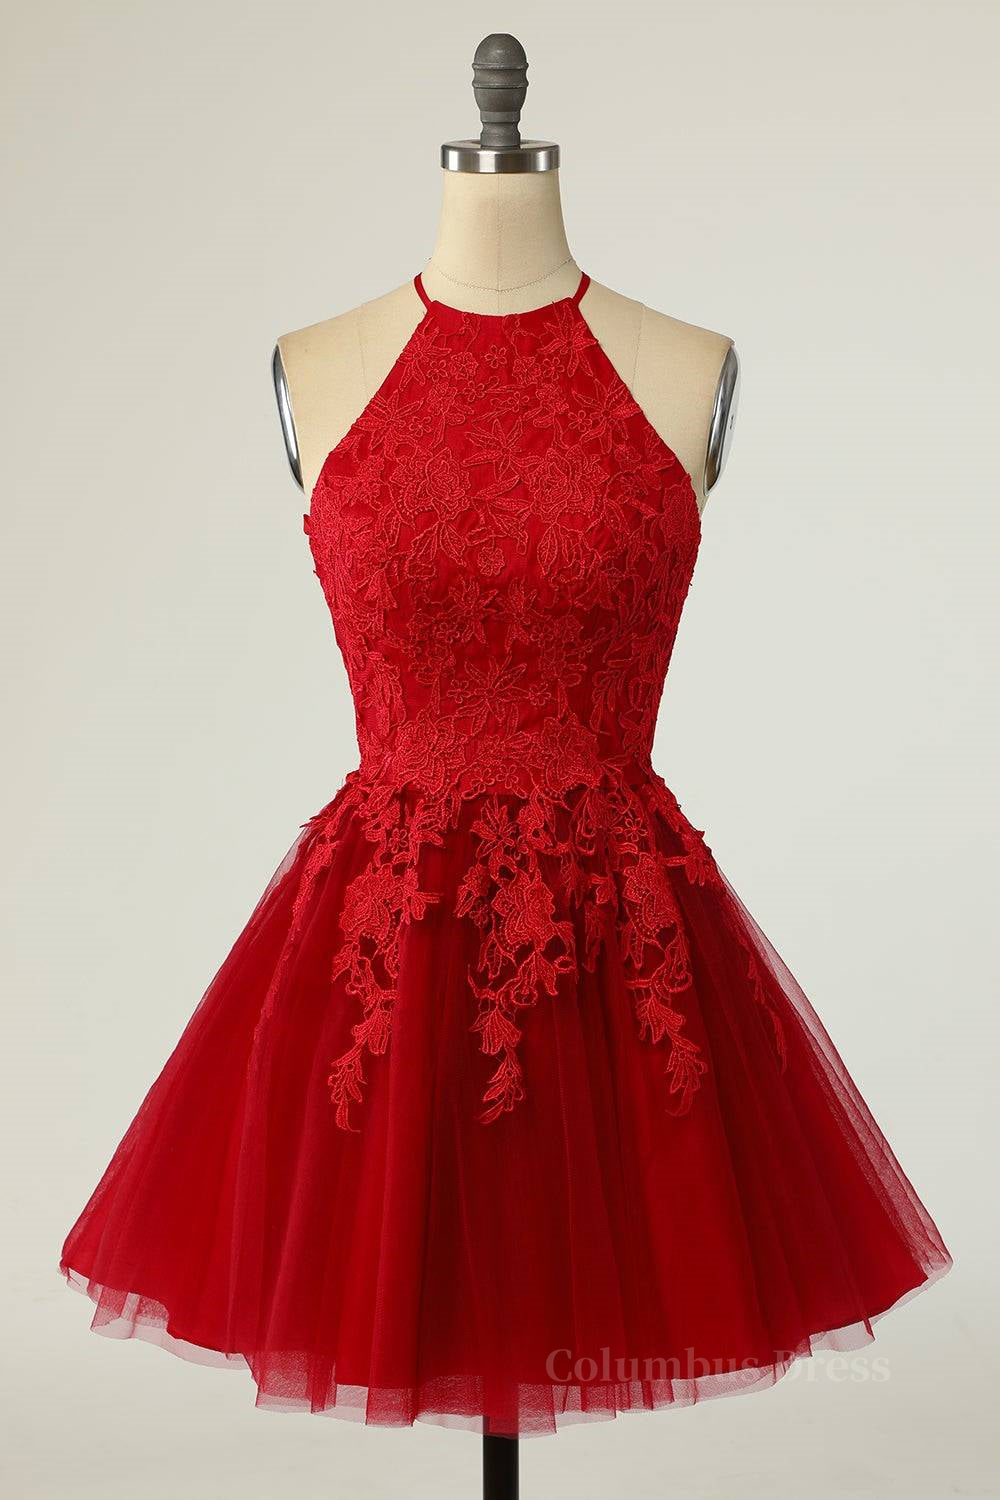 Party Dress Red Colour, A-line Halter Keyhole Back Applique Mini Homecoming Dress